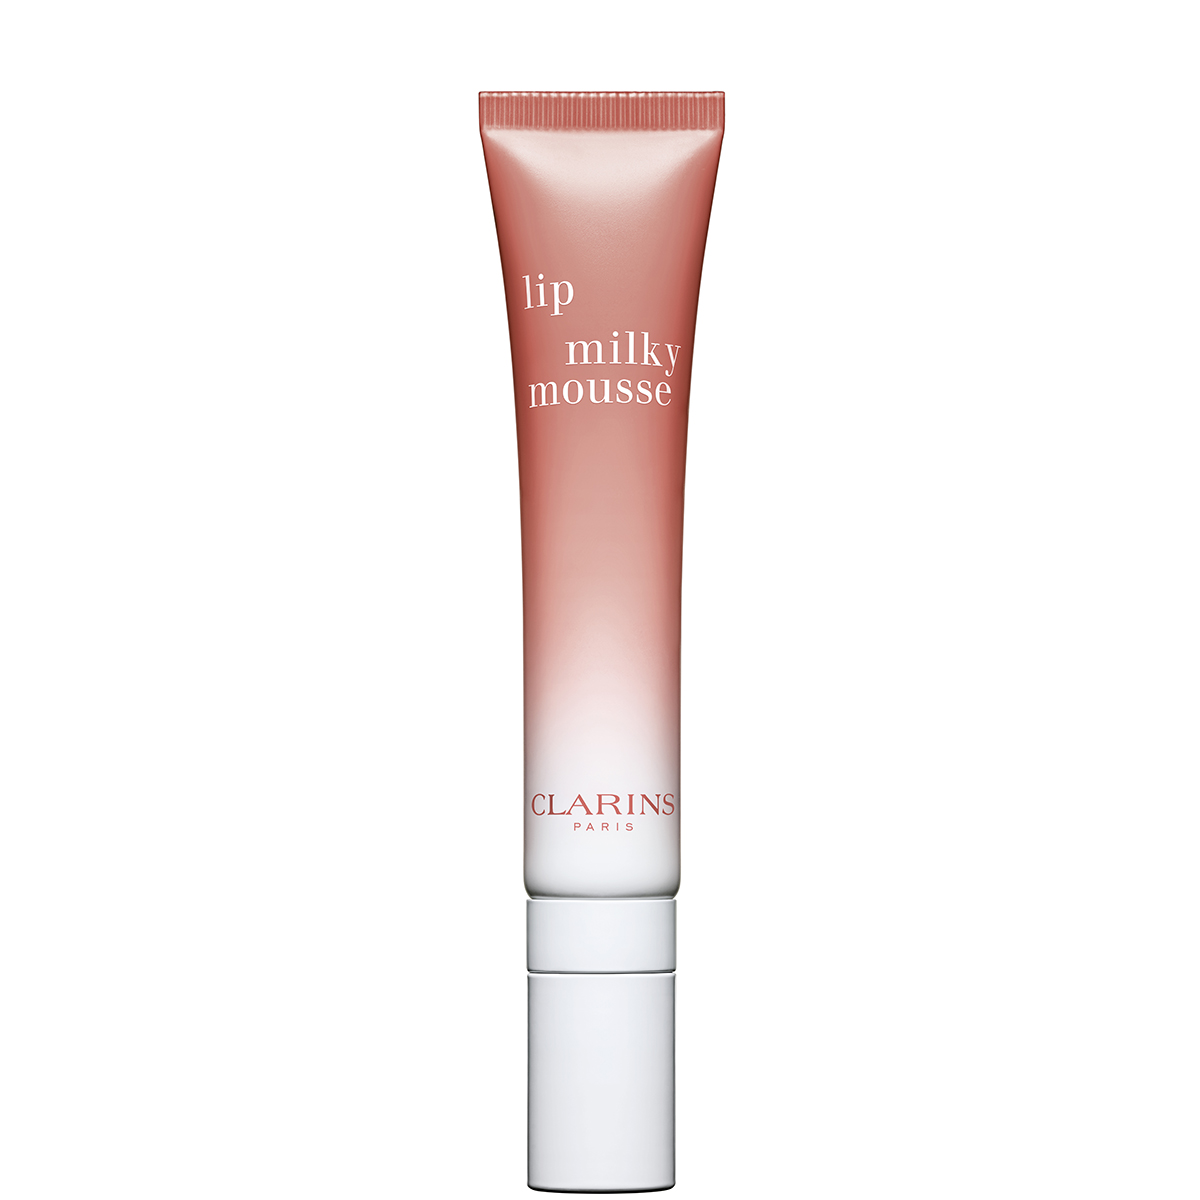 Clarins Lip Milky Mousse Milky Pinky Nude